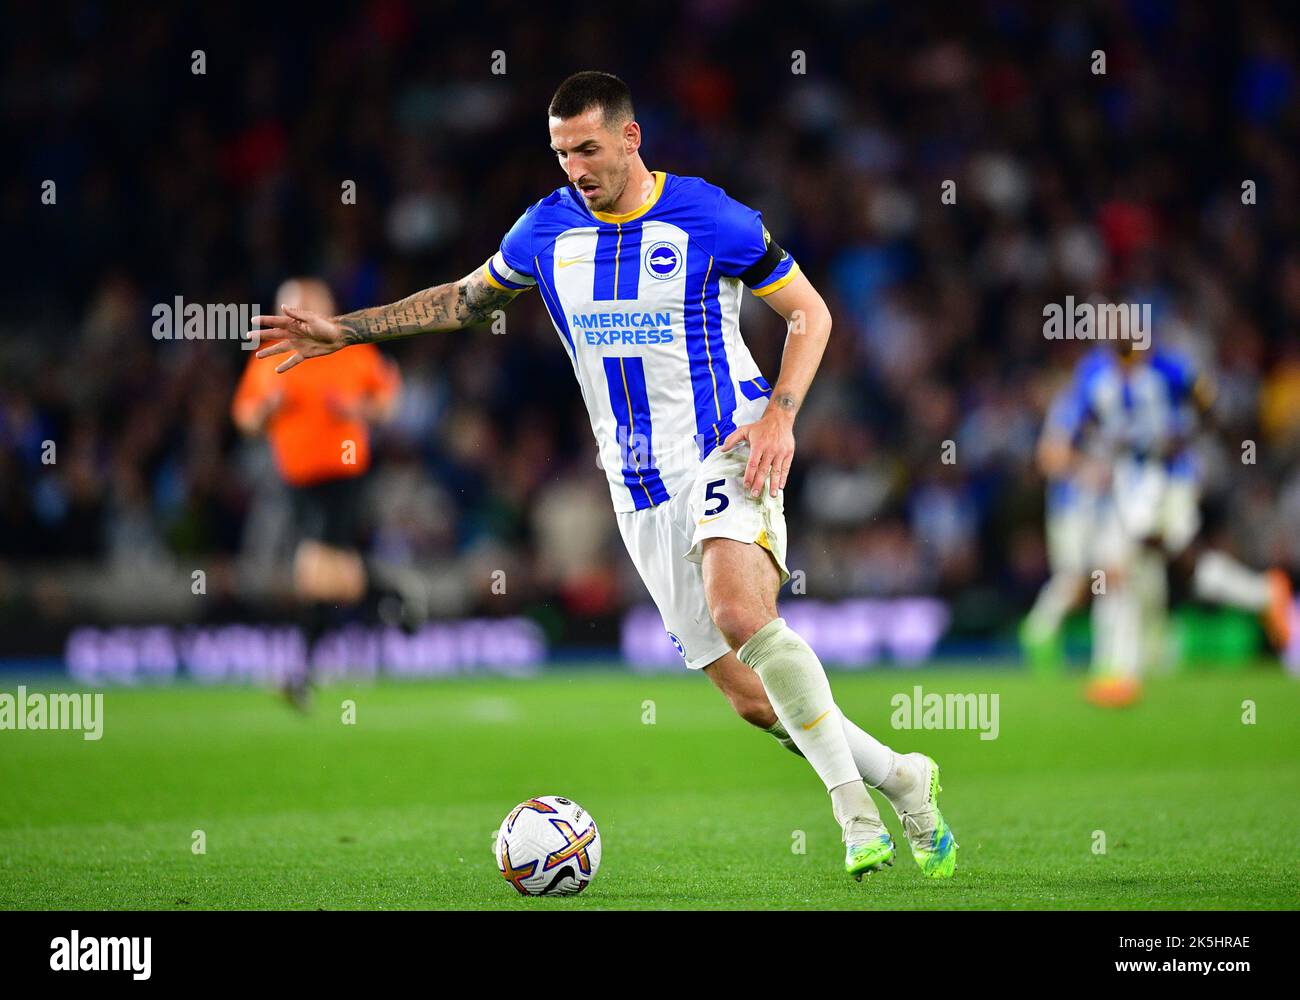 Brighton, UK. 08th Oct, 2022. Lewis Dunk of Brighton and Hove Albion during the Premier League match between Brighton & Hove Albion and Tottenham Hotspur at The Amex on October 8th 2022 in Brighton, England. (Photo by Jeff Mood/phcimages.com) Credit: PHC Images/Alamy Live News Stock Photo